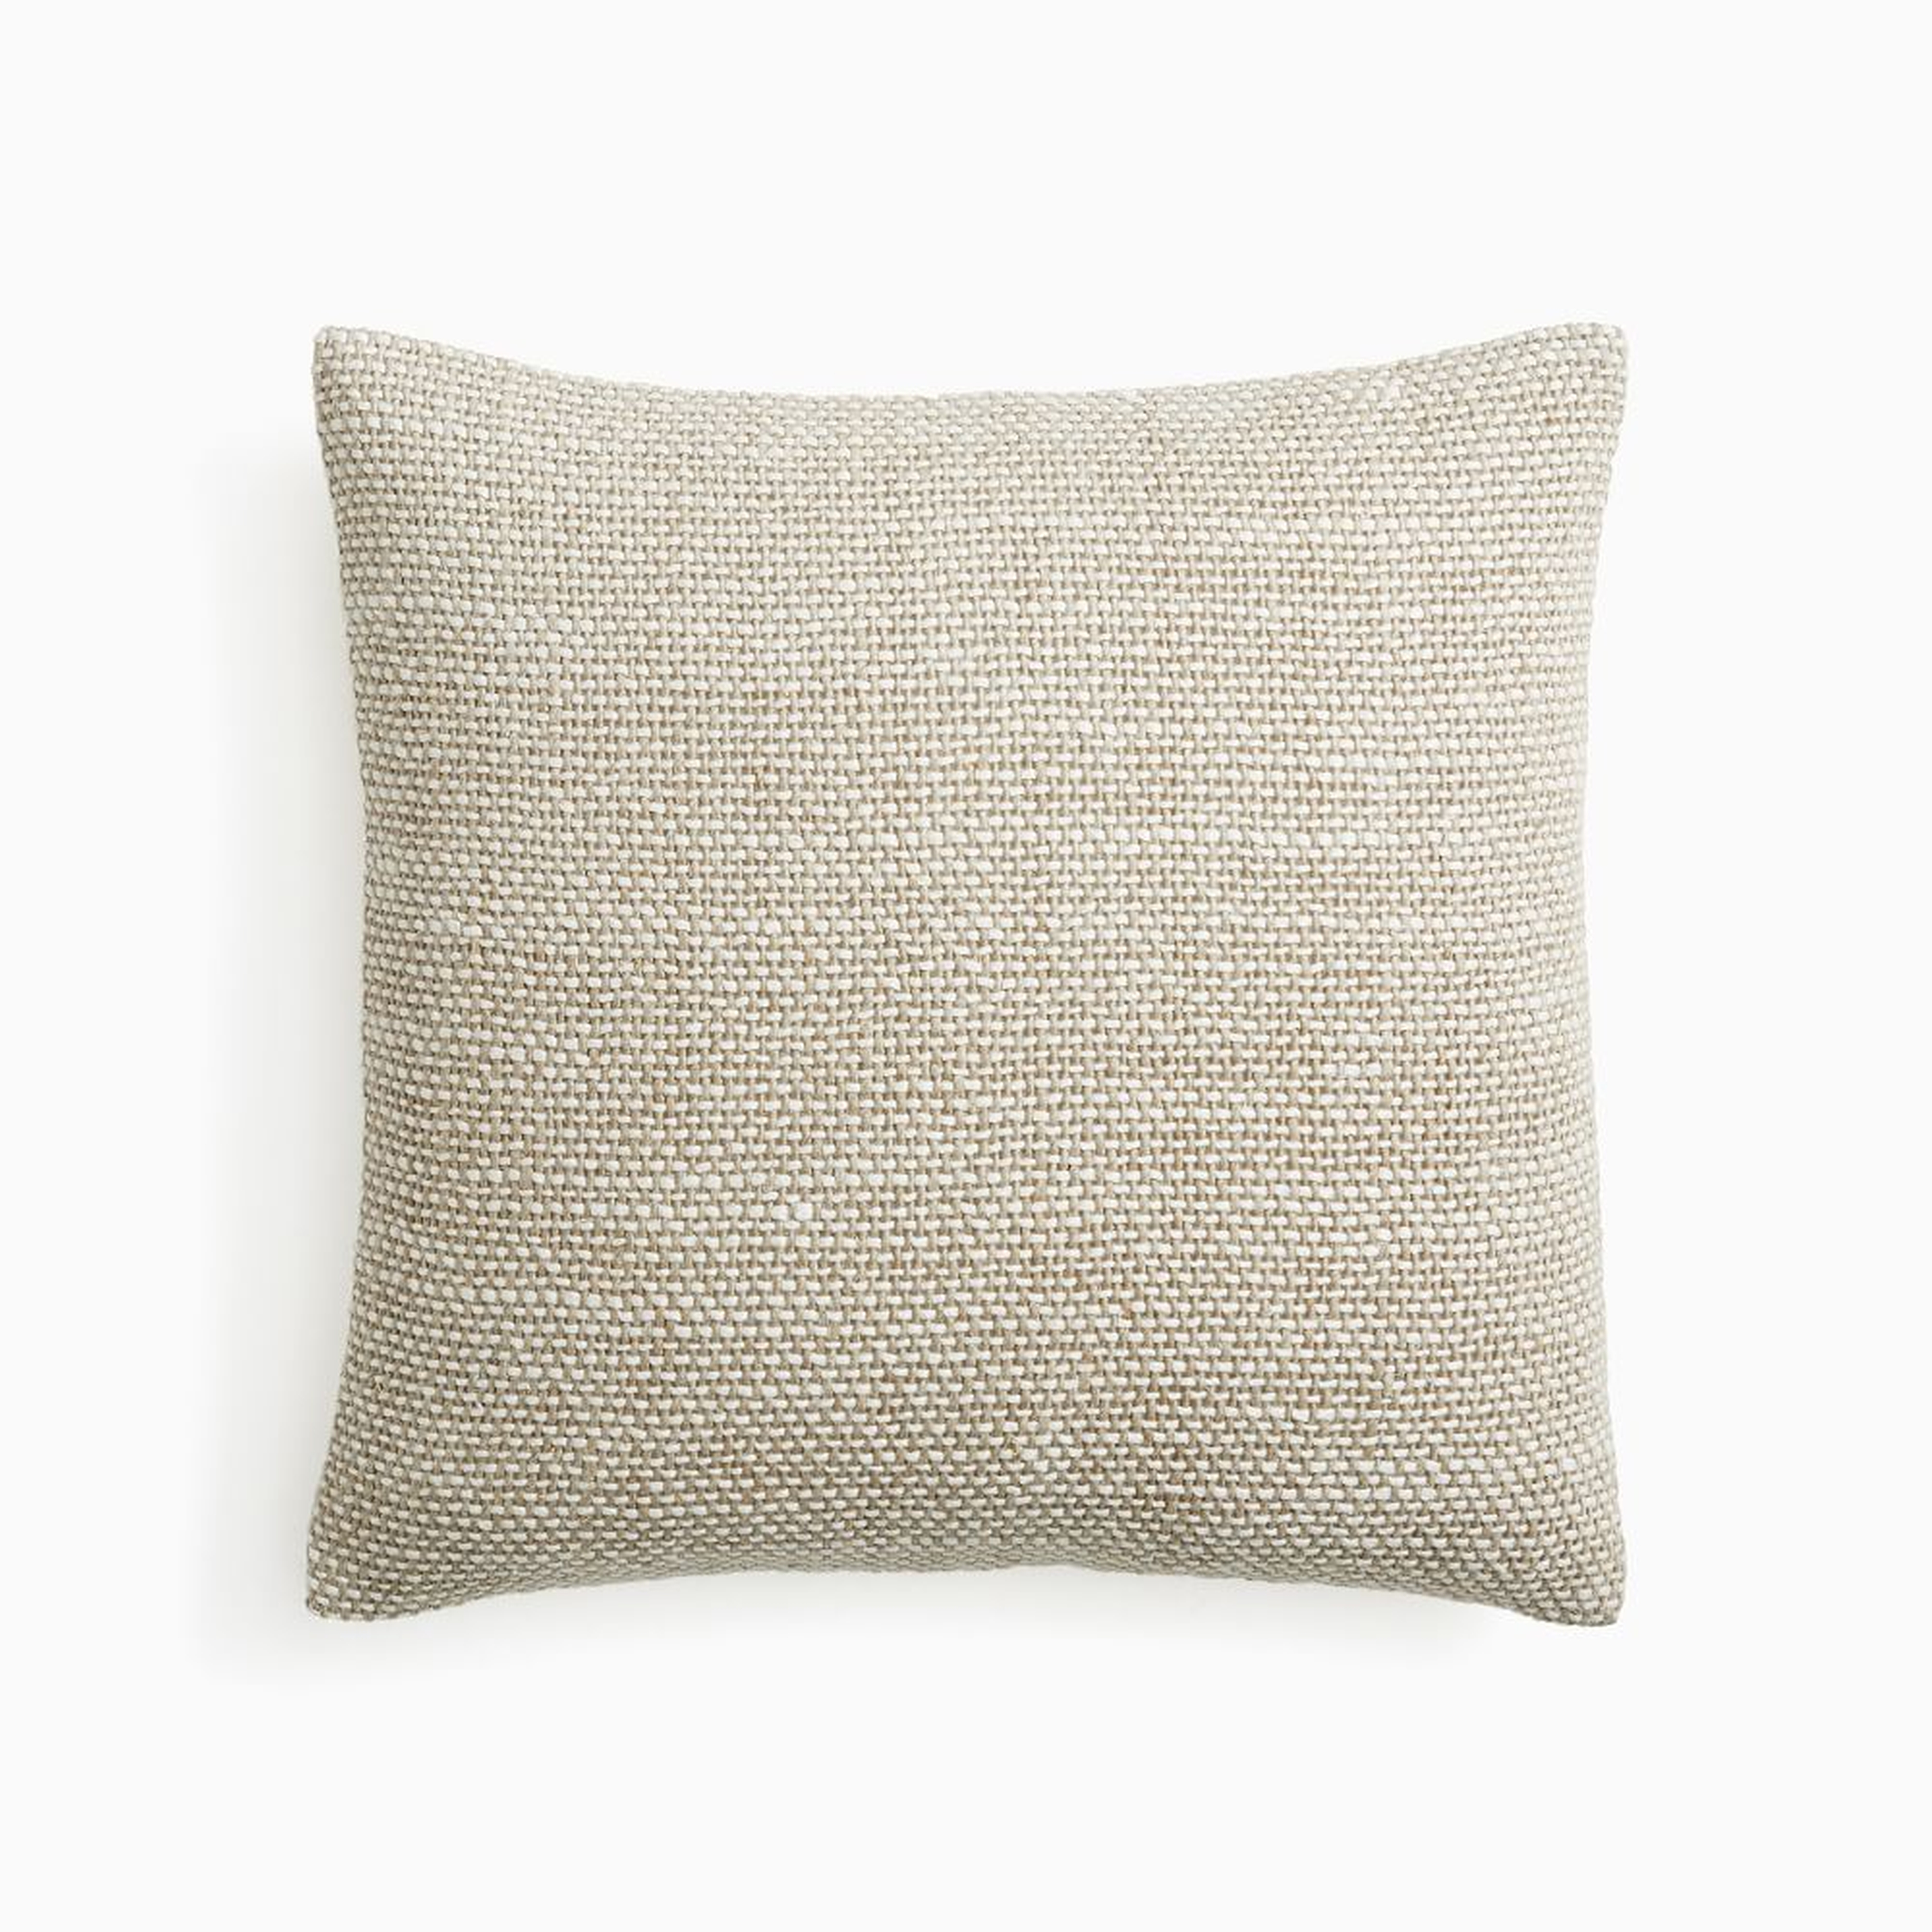 Two Tone Chunky Linen Pillow Cover, 20"x20", Natural - West Elm